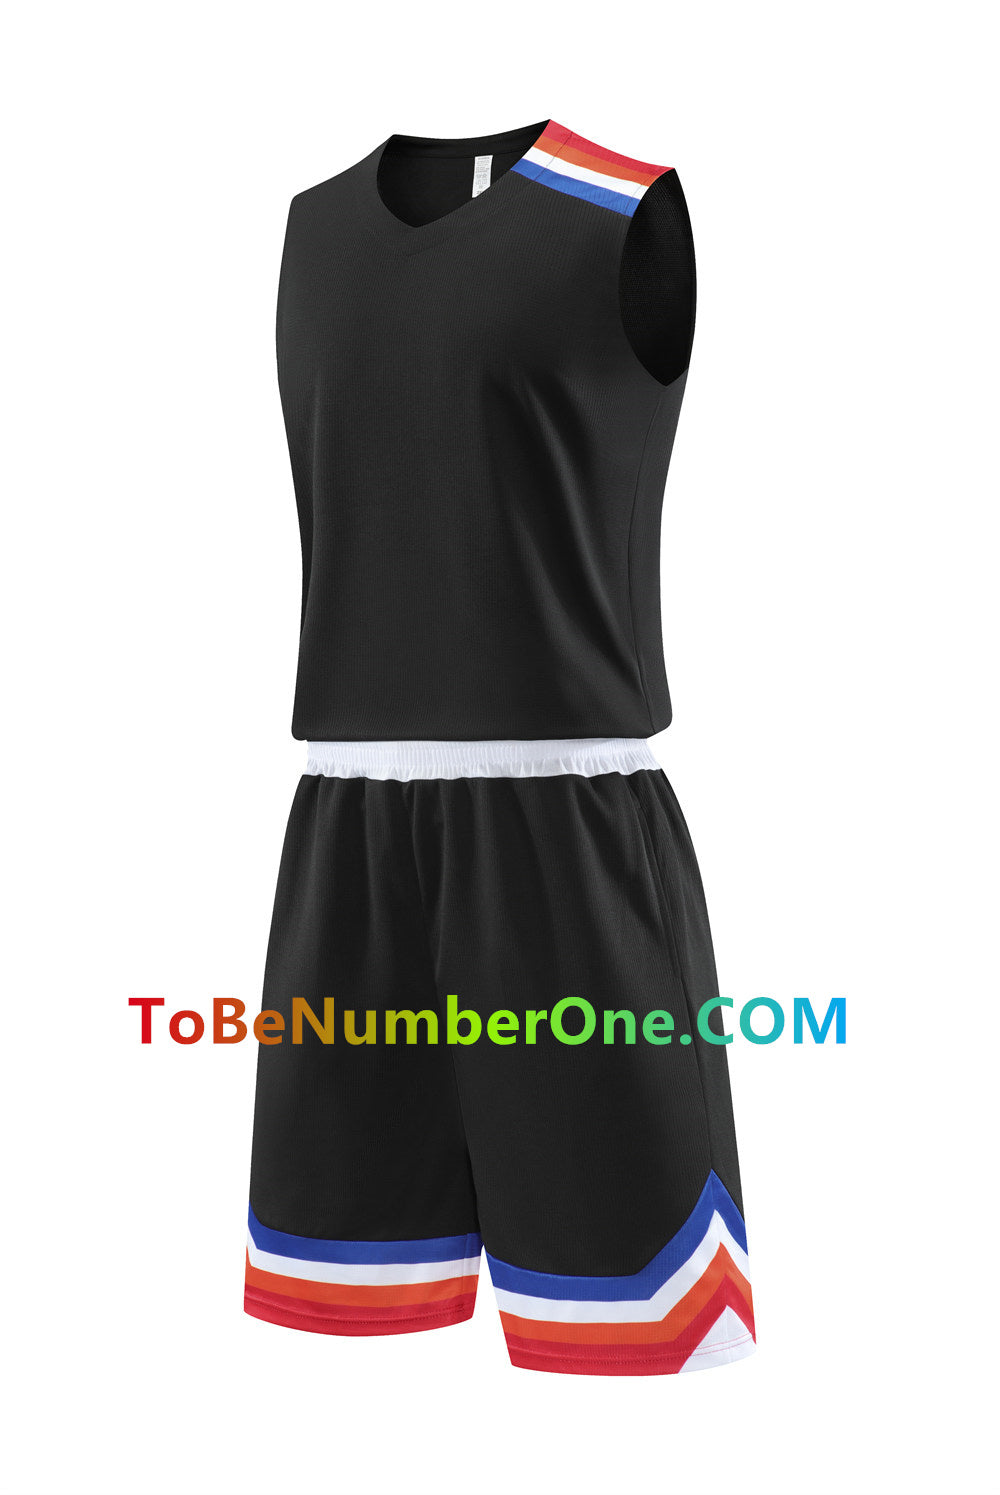 Customize instock High Quality Quick-drying basketball jerseys&shorts with pocket 227#print with team name , player and number.